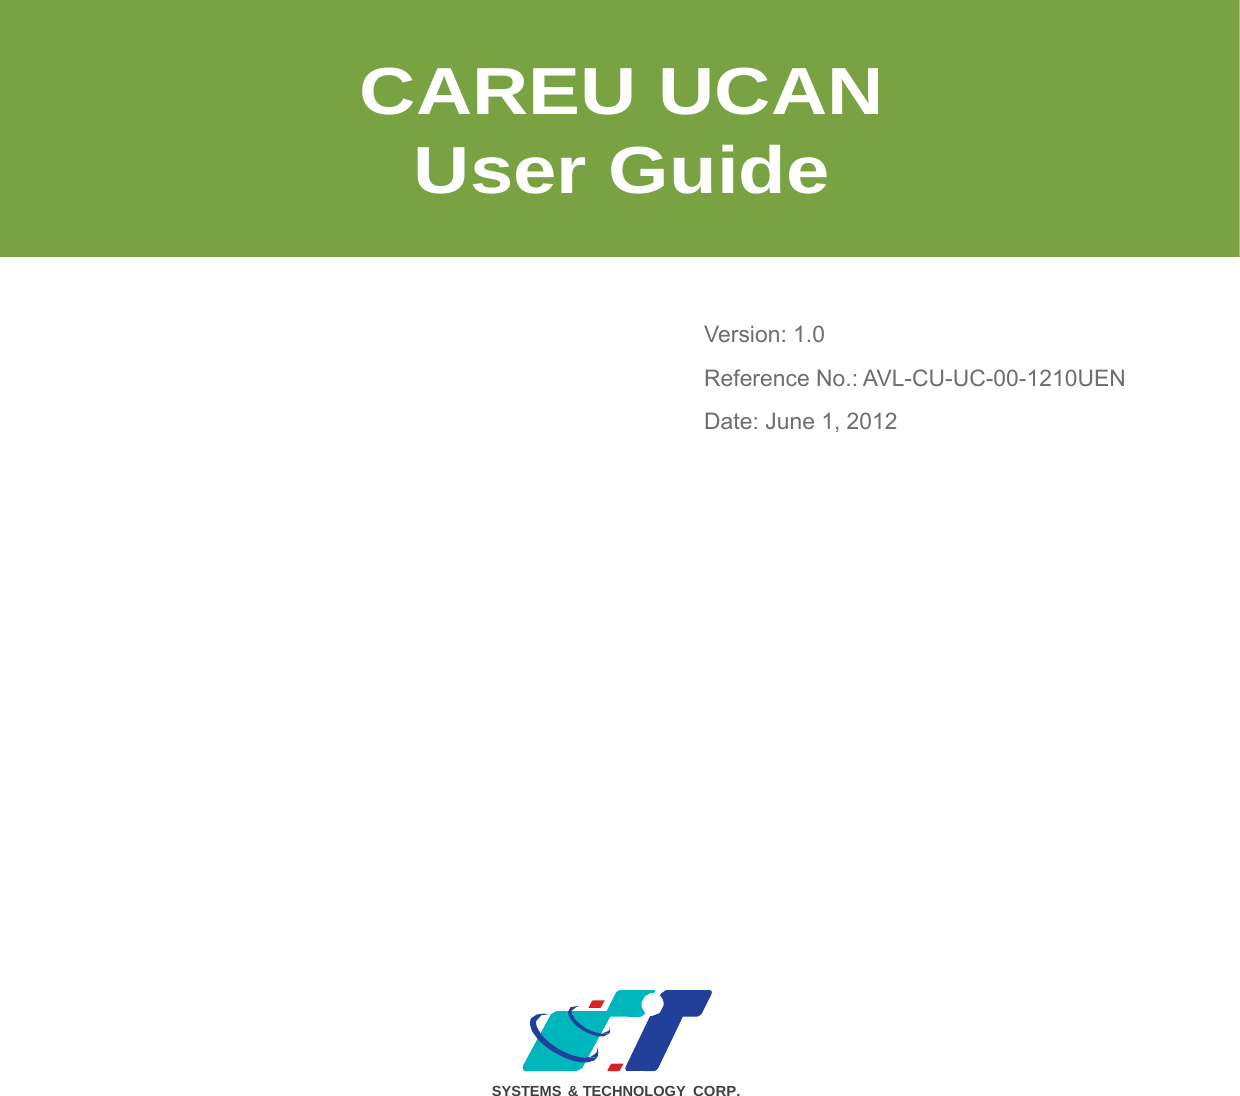 CAREU UCAN User Guide Version: 1.0 Reference No.: AVL-CU-UC-00-1210UEN Date: June 1, 2012 SYSTEMS &amp; TECHNOLOGY CORP. 